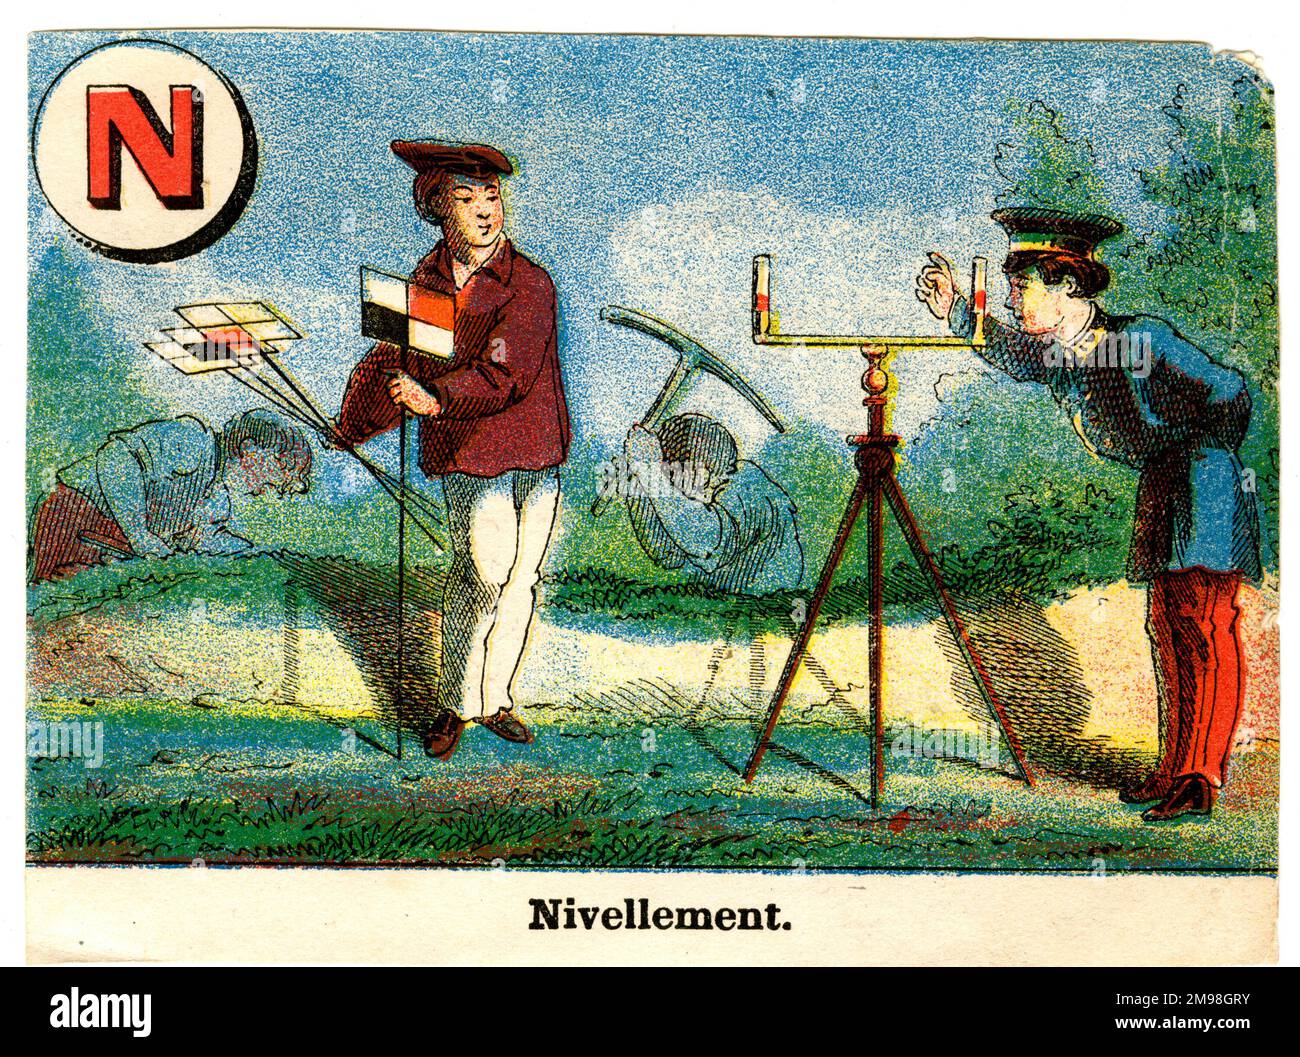 French Railway Alphabet - N for Nivellement (levelling, surveying). Stock Photo